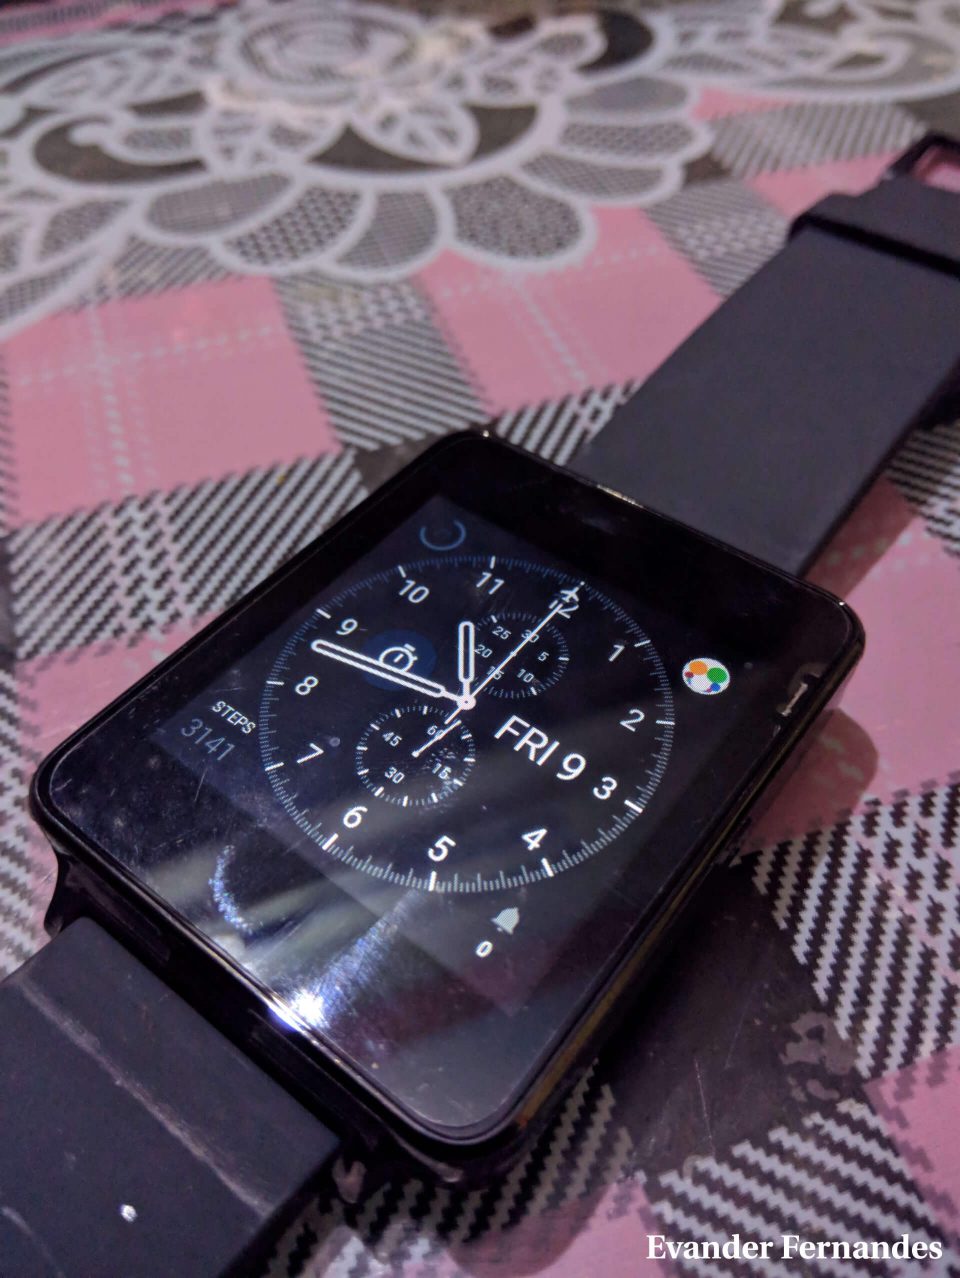 The Smart Watch Experience: Is it worth It?